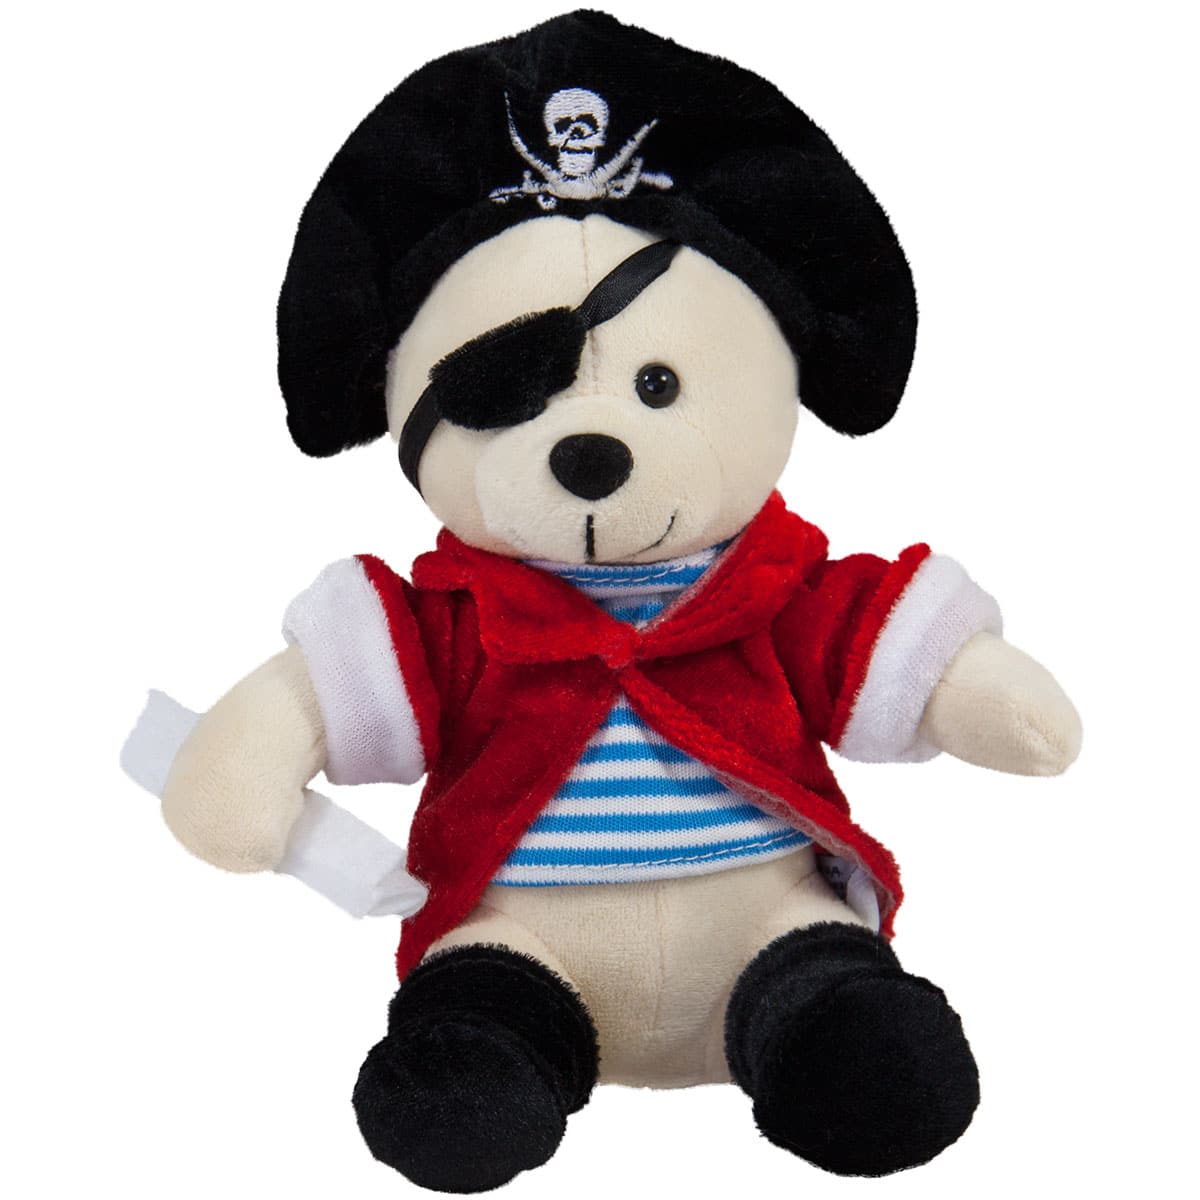 Pirate bear - With black hat and red vest